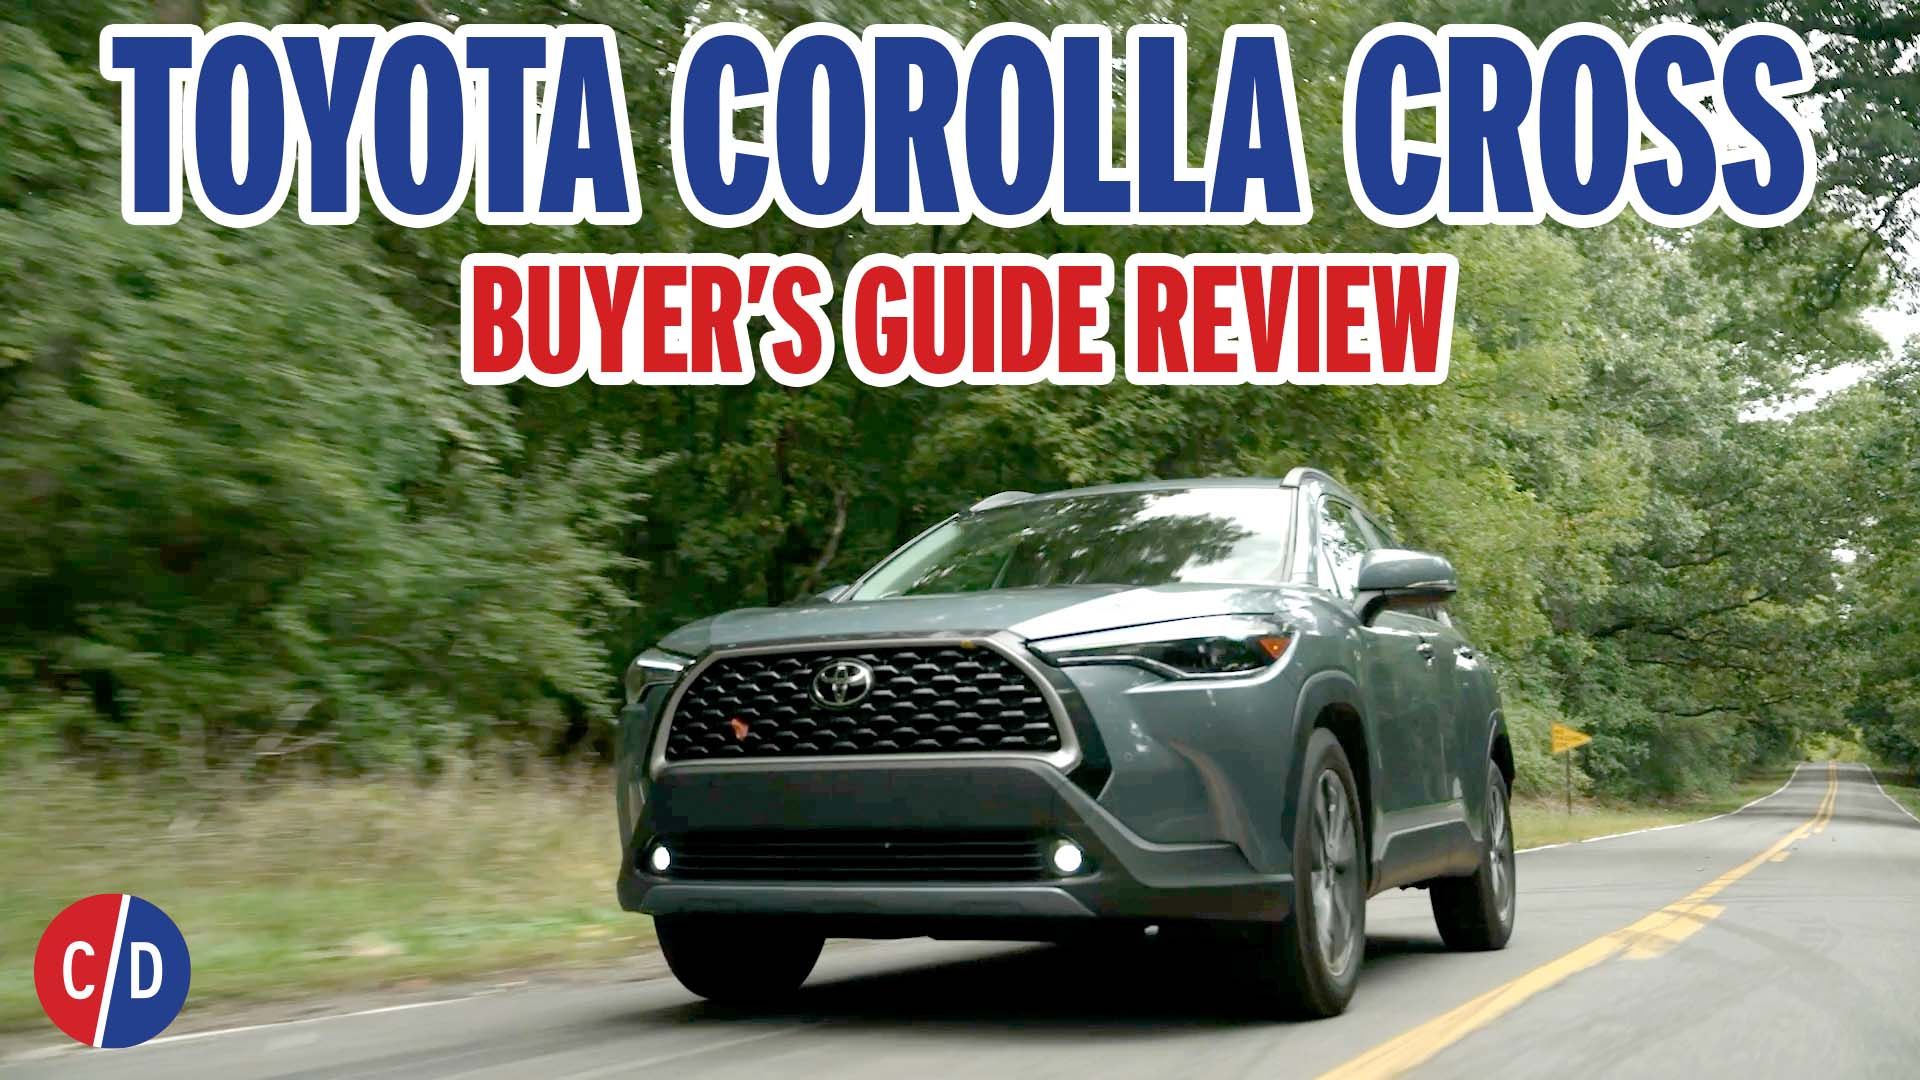 2022 Toyota Corolla Cross Specs, Review, and Features